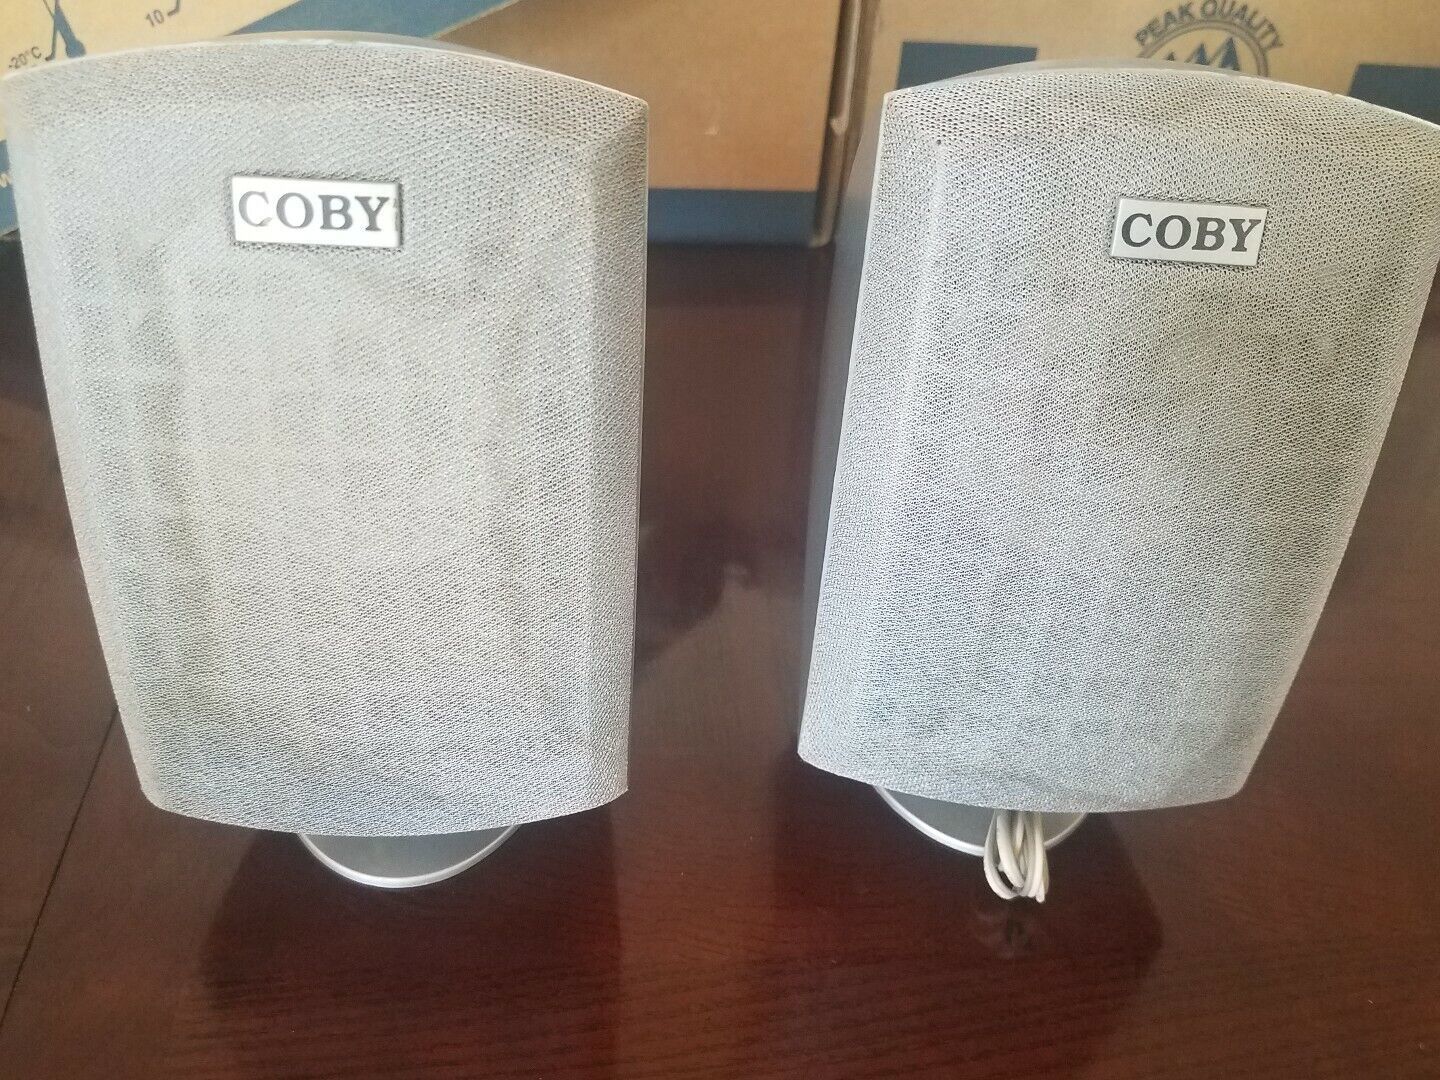 COBY Speakers In Home Audio - $59.67